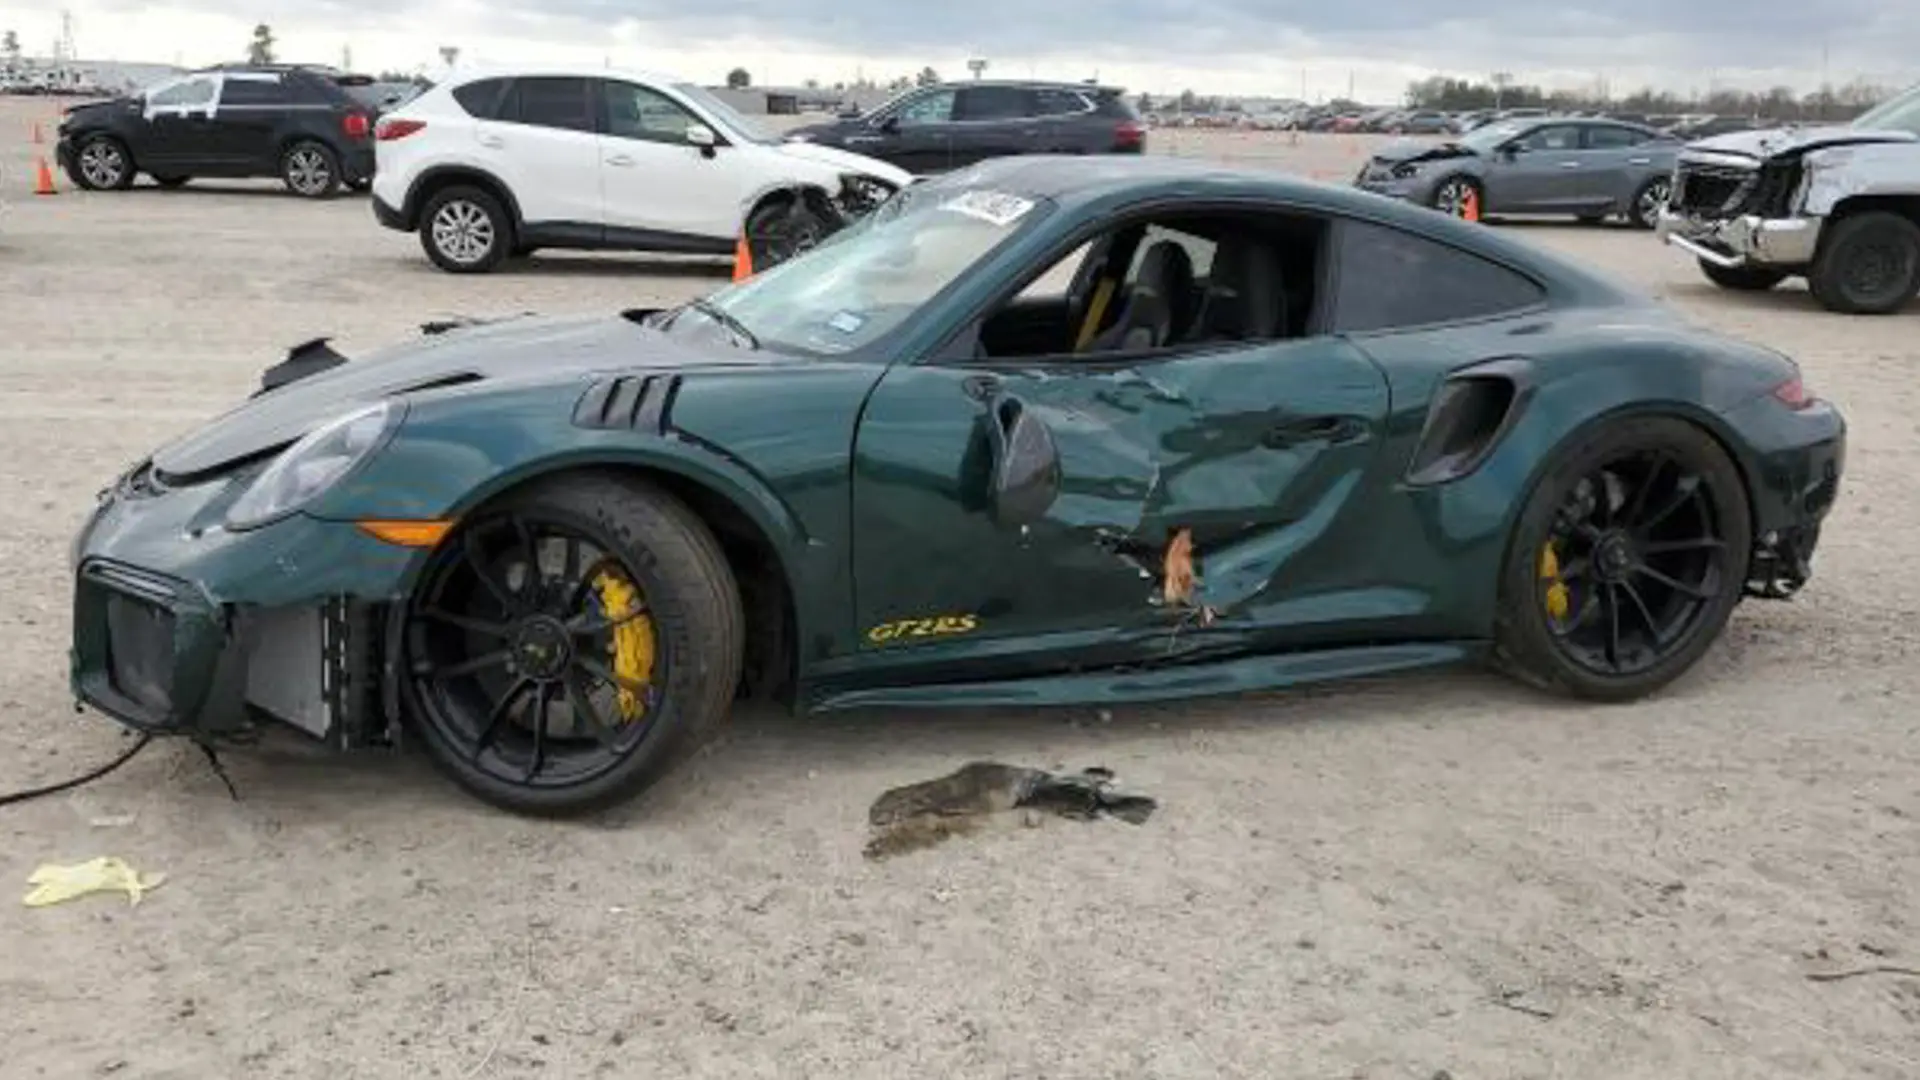 Patrick Reeds Wrecked Masters Porsche 911 Gt2 Rs Appears On Copart